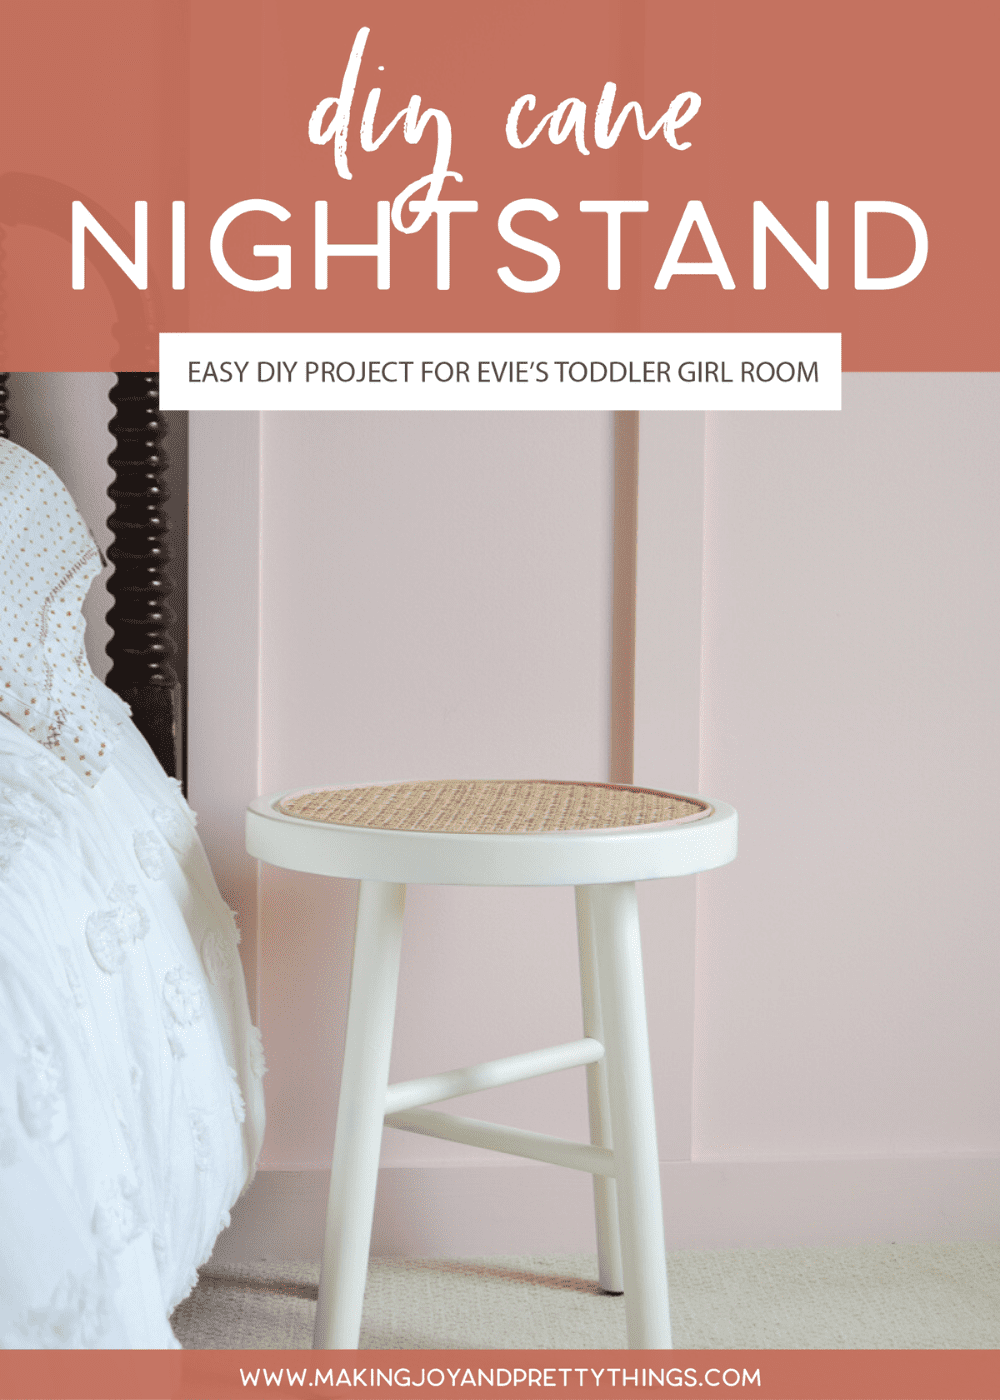 Follow along with this easy DIY cane nightstand tutorial to create your own night stand from a target stool